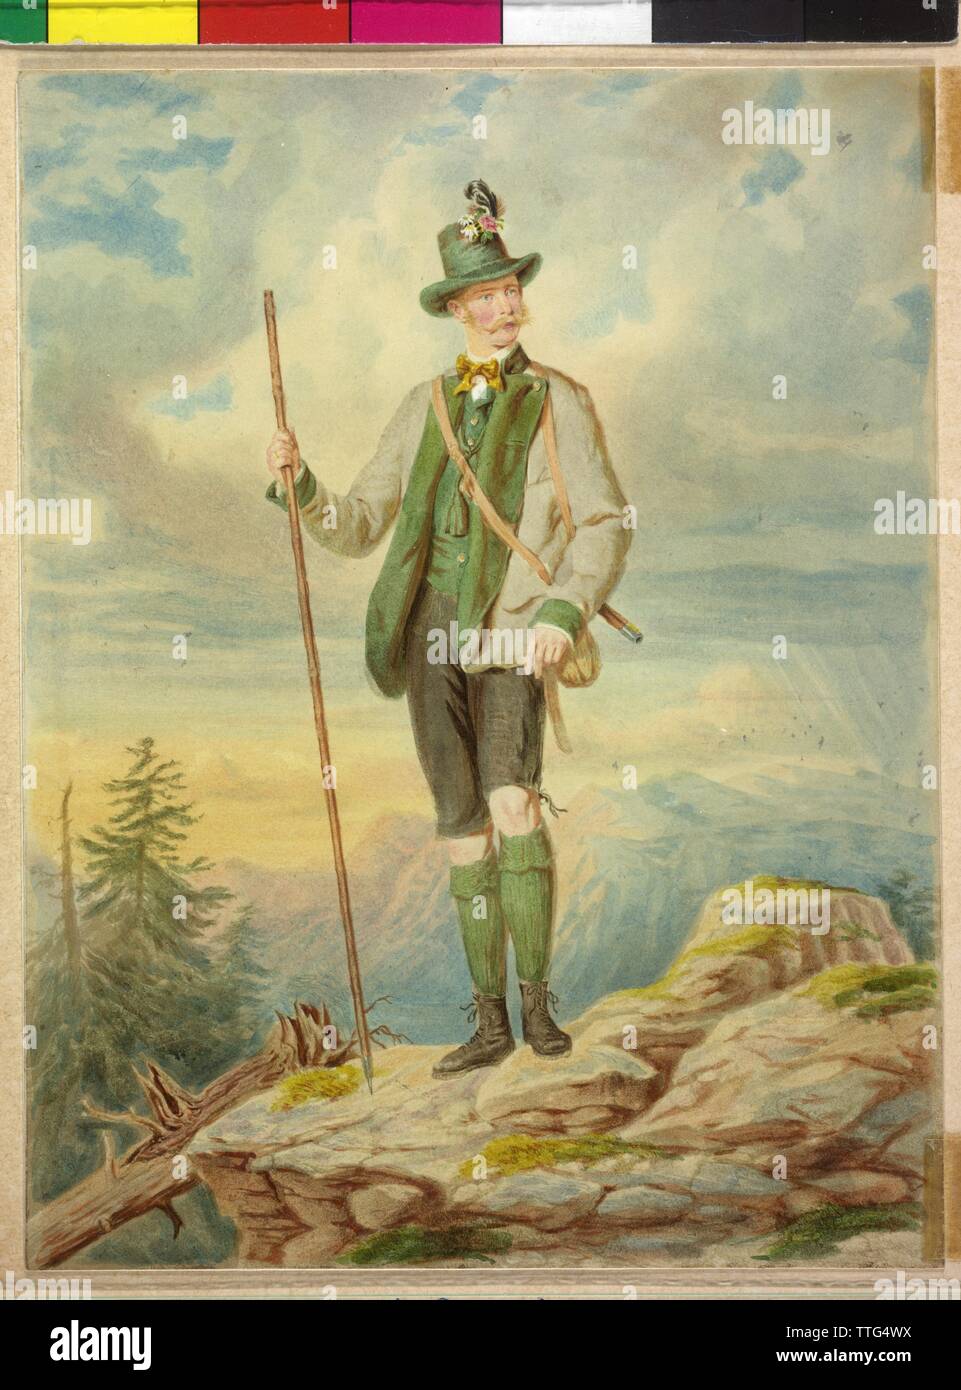 Franz Joseph I, Emperor of Austria, Franz Joseph I in Upper Austrian traditional costume in the environment of Ischl. coloured photo reproduction based on a lithograph by Joseph Kriehuber, Additional-Rights-Clearance-Info-Not-Available Stock Photo